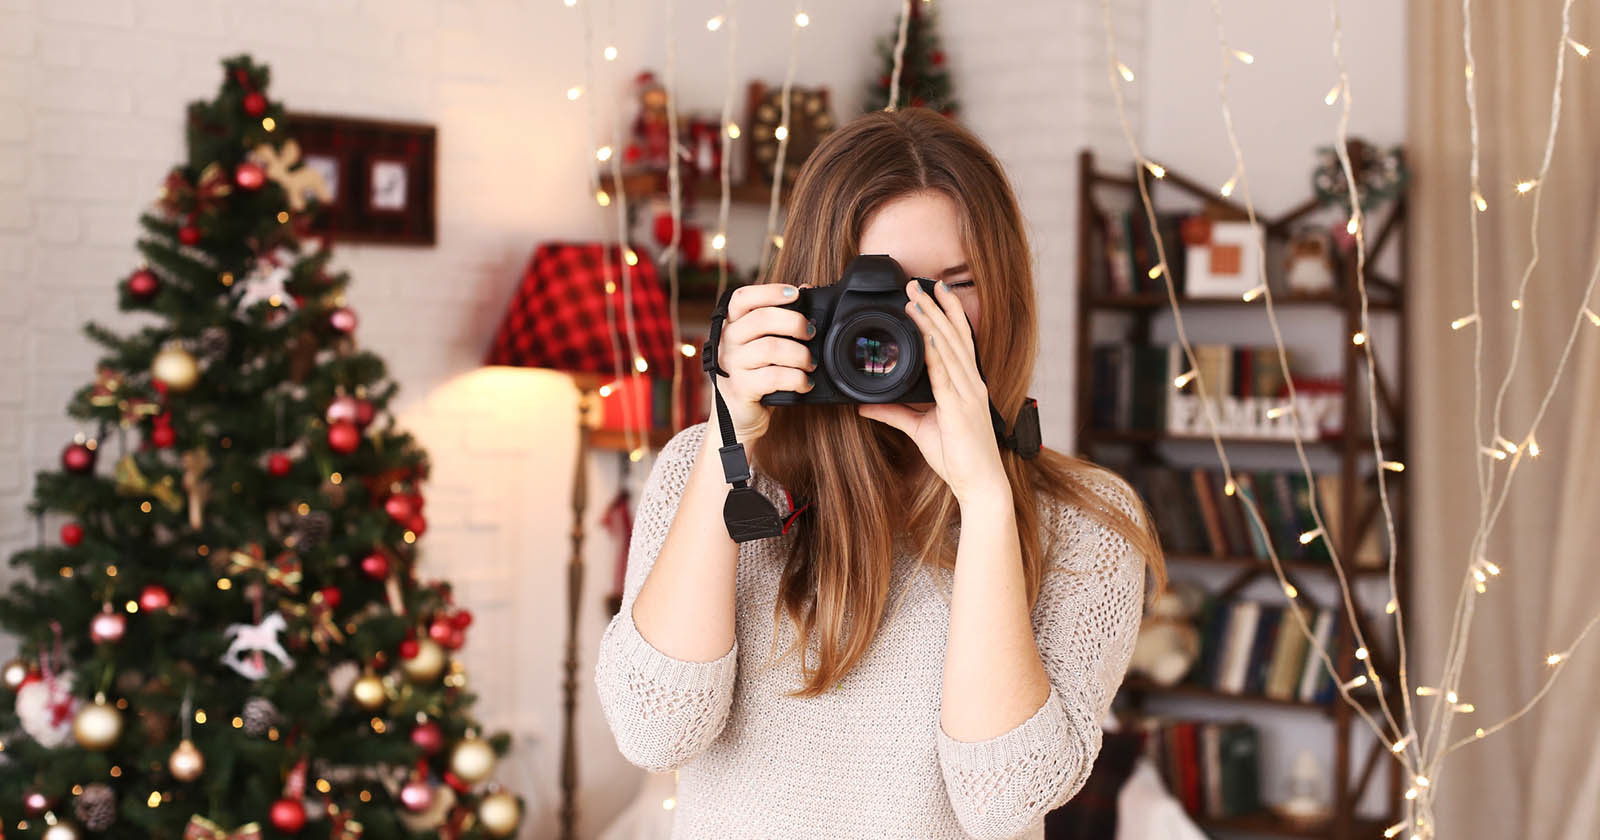 8 Great Gifts for Photographers in the 2022 Holiday Season